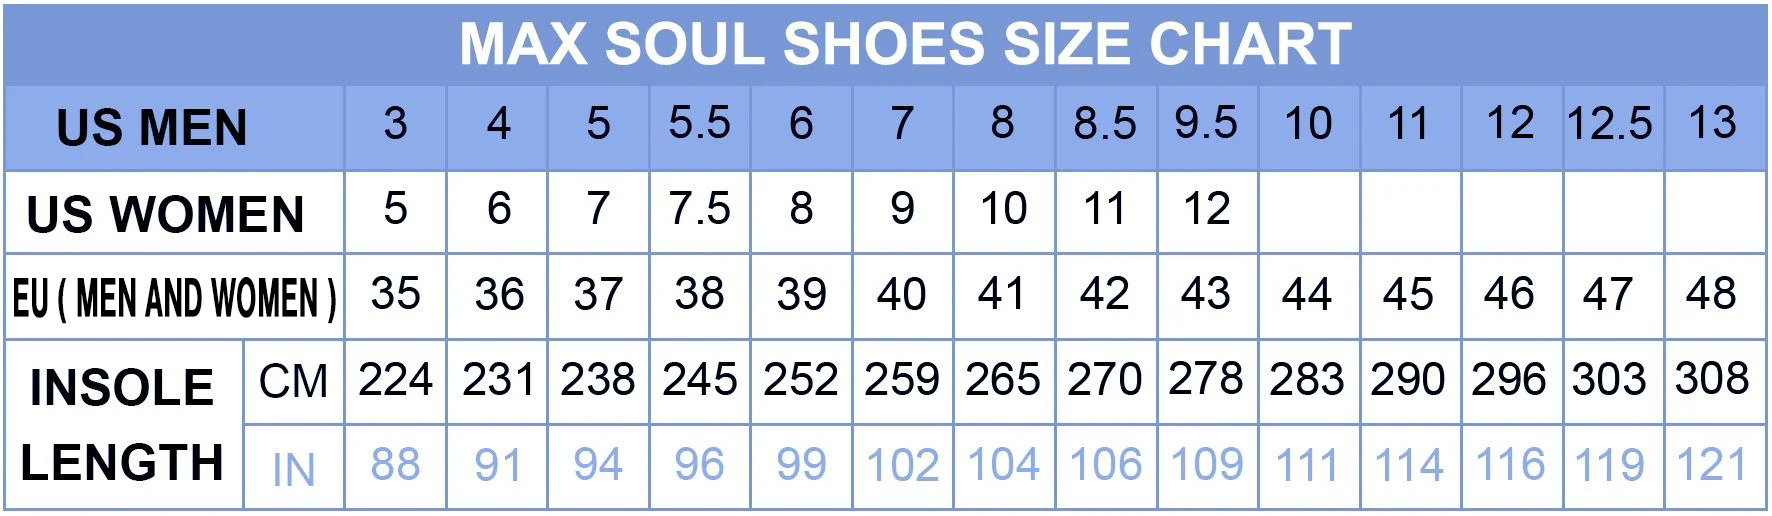 BEST Mattel Clunky Max Soul Sneakers 9